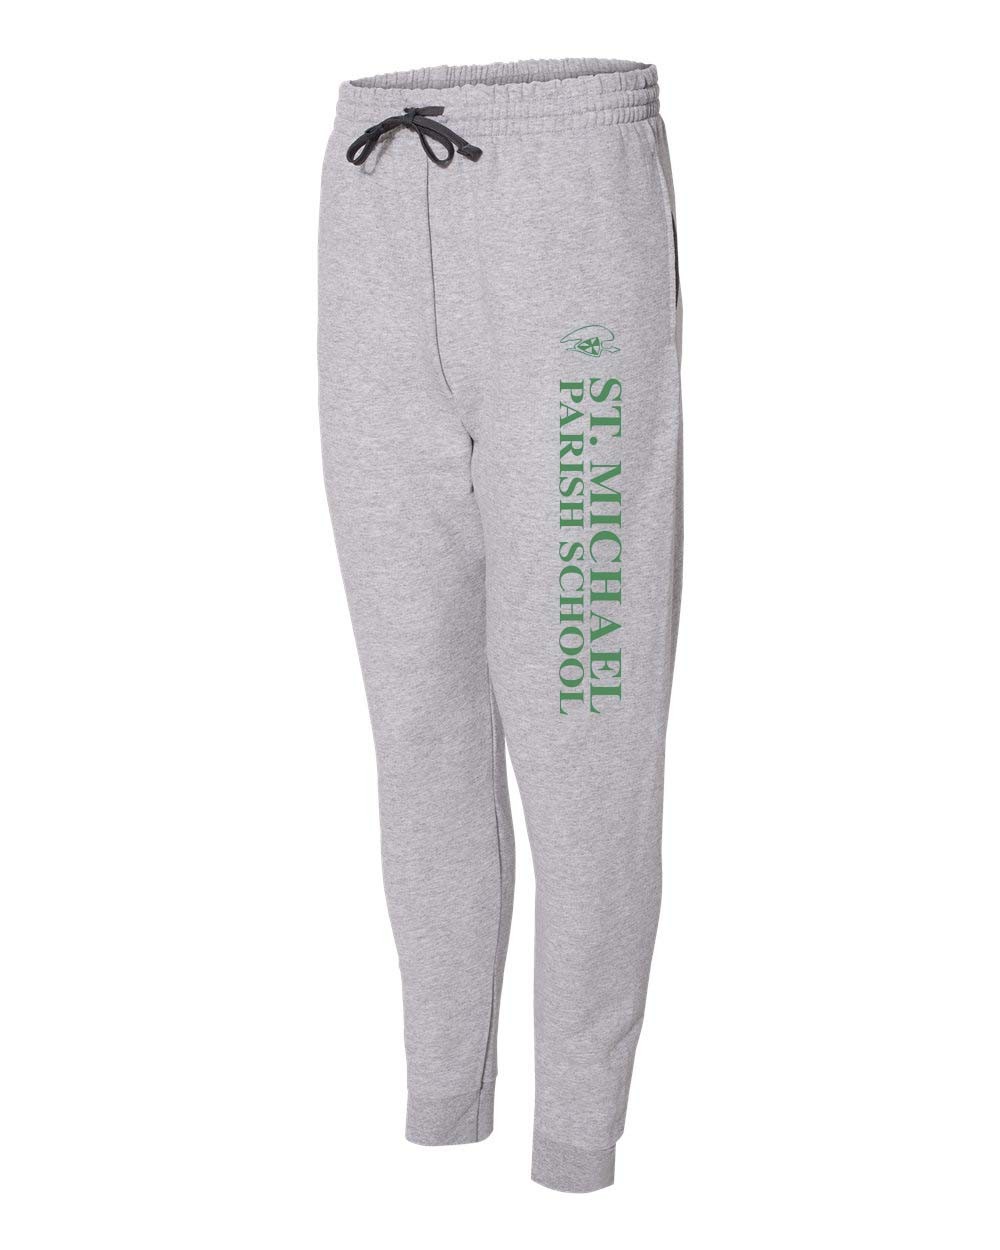 SMSU Spirit Joggers w/ Green Logo #23- Please Allow 2-3 Weeks for Delivery